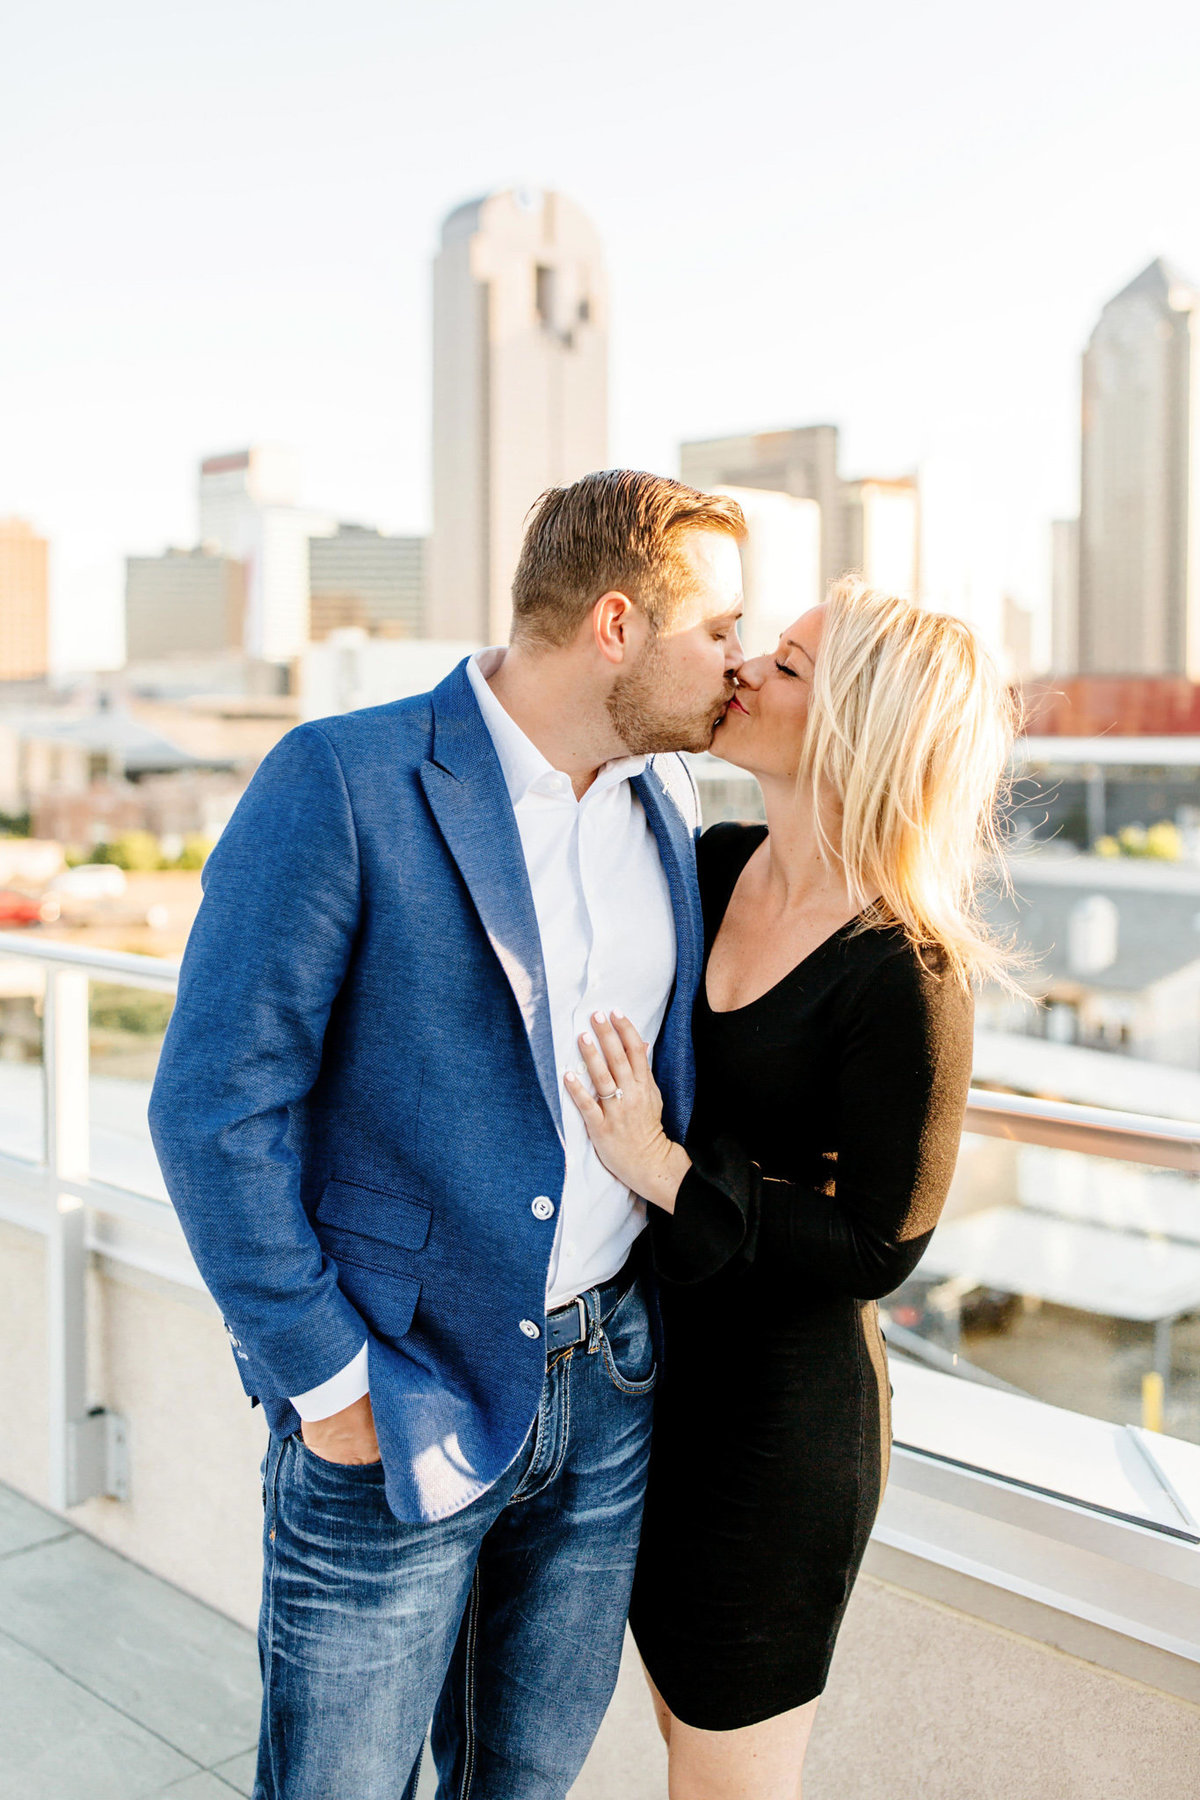 Eric & Megan - Downtown Dallas Rooftop Proposal & Engagement Session-64